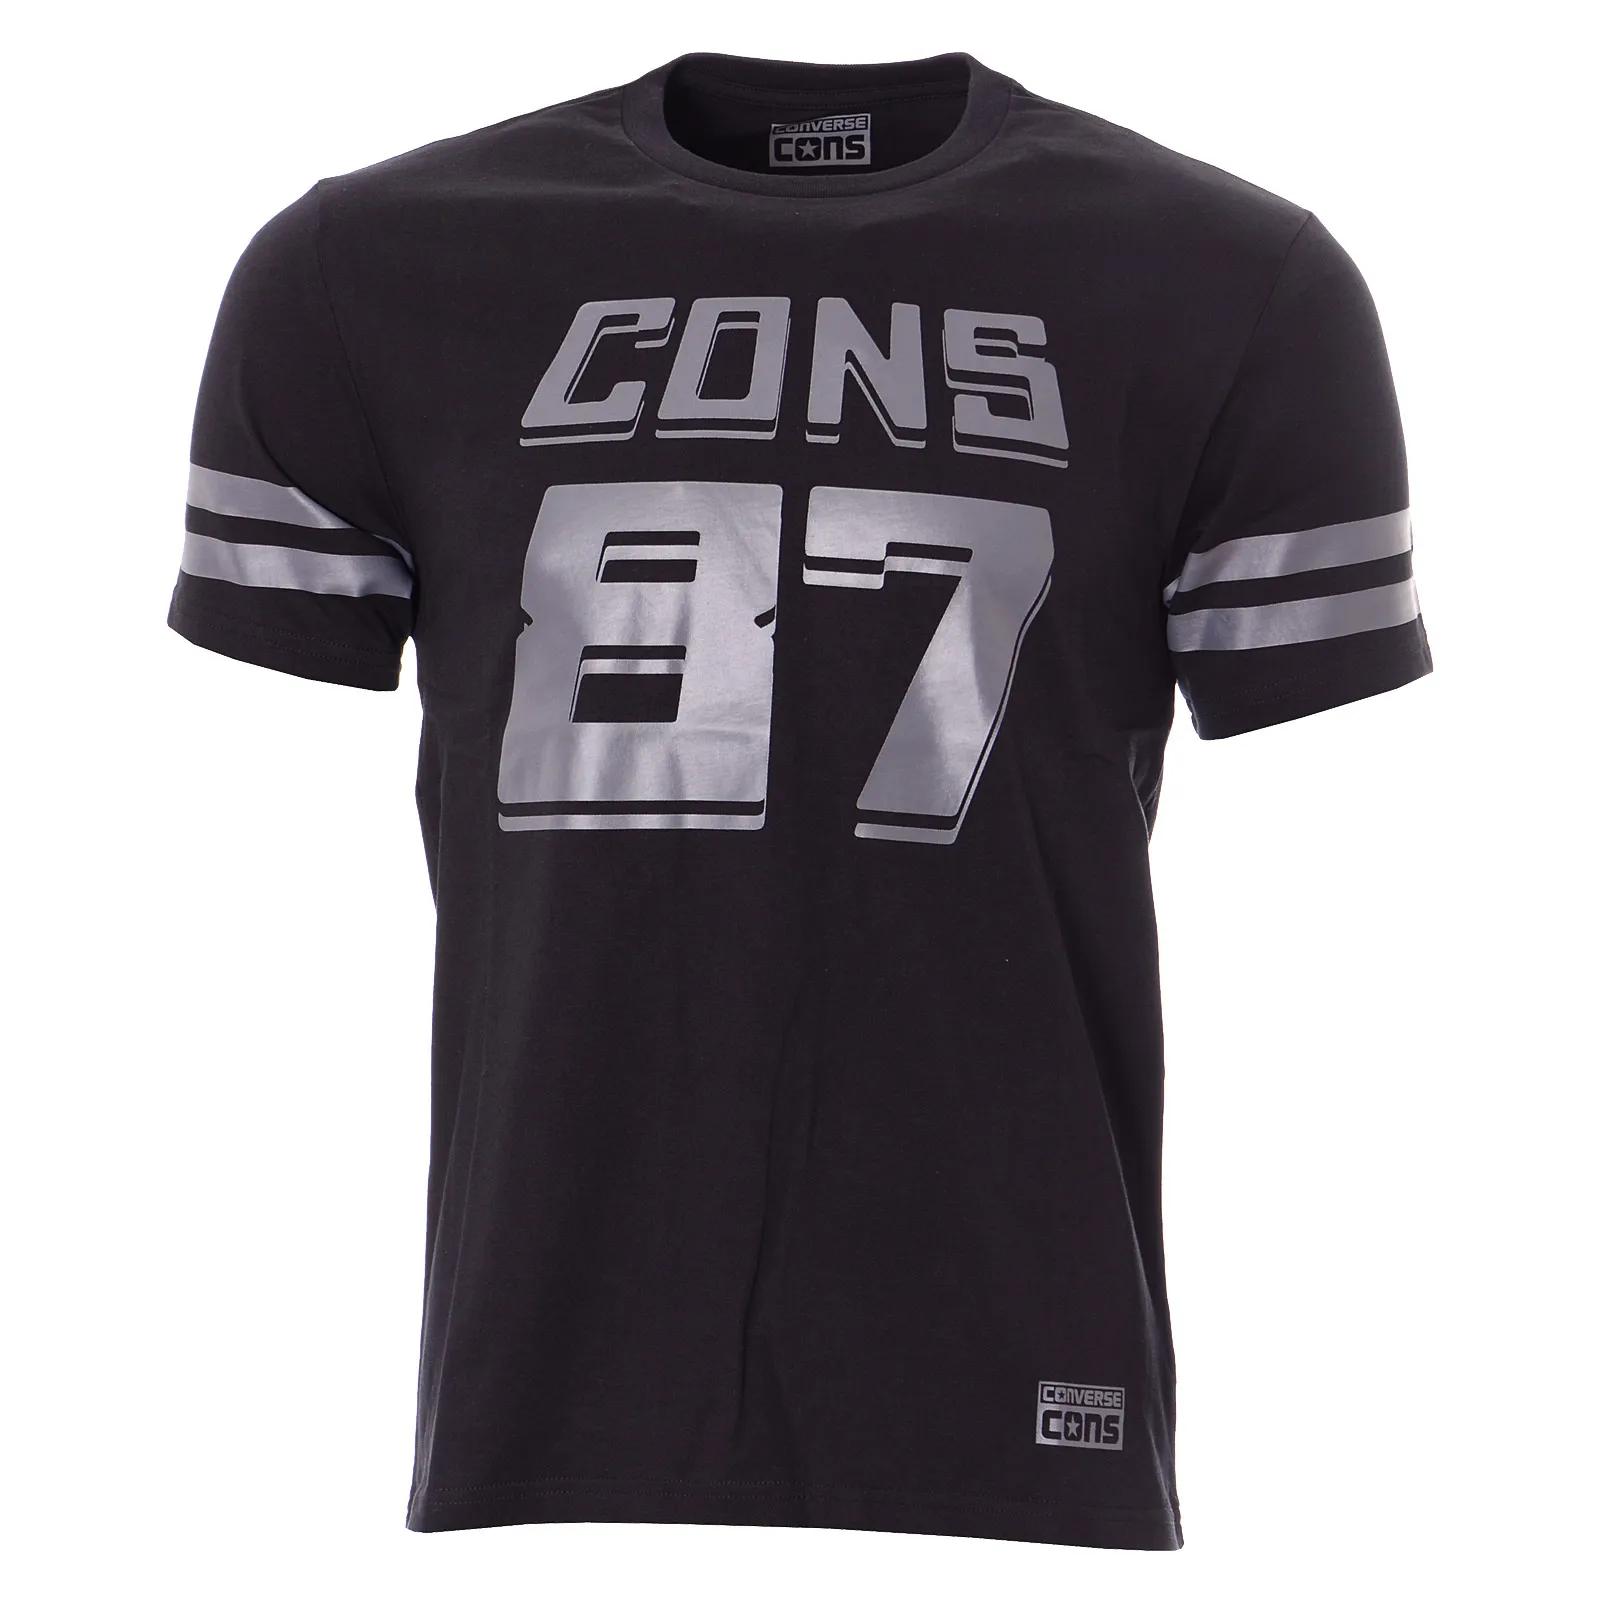 Converse CONS PERSPECTIVE TEE 